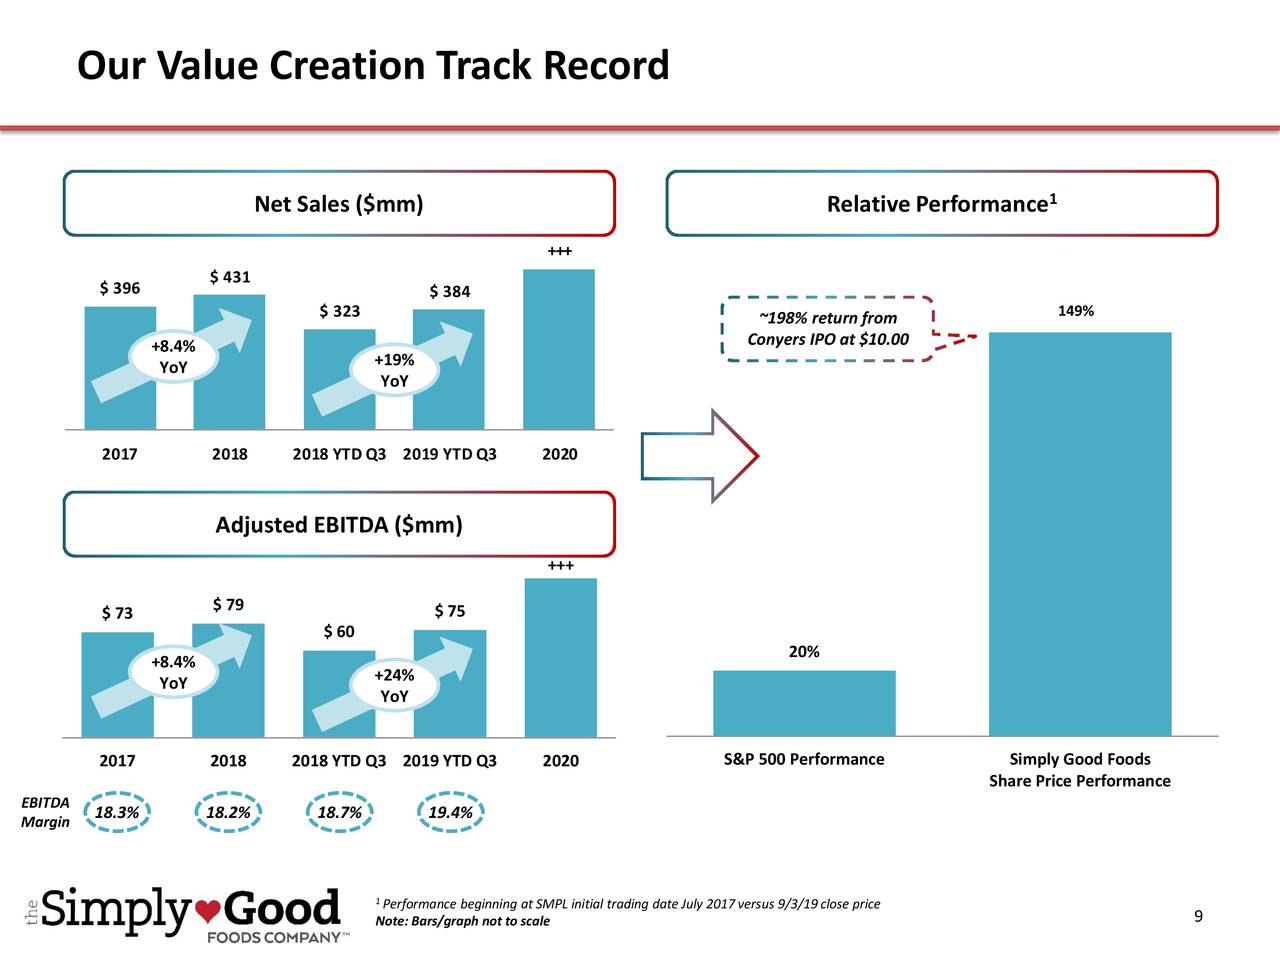 Our Value Creation Track Record